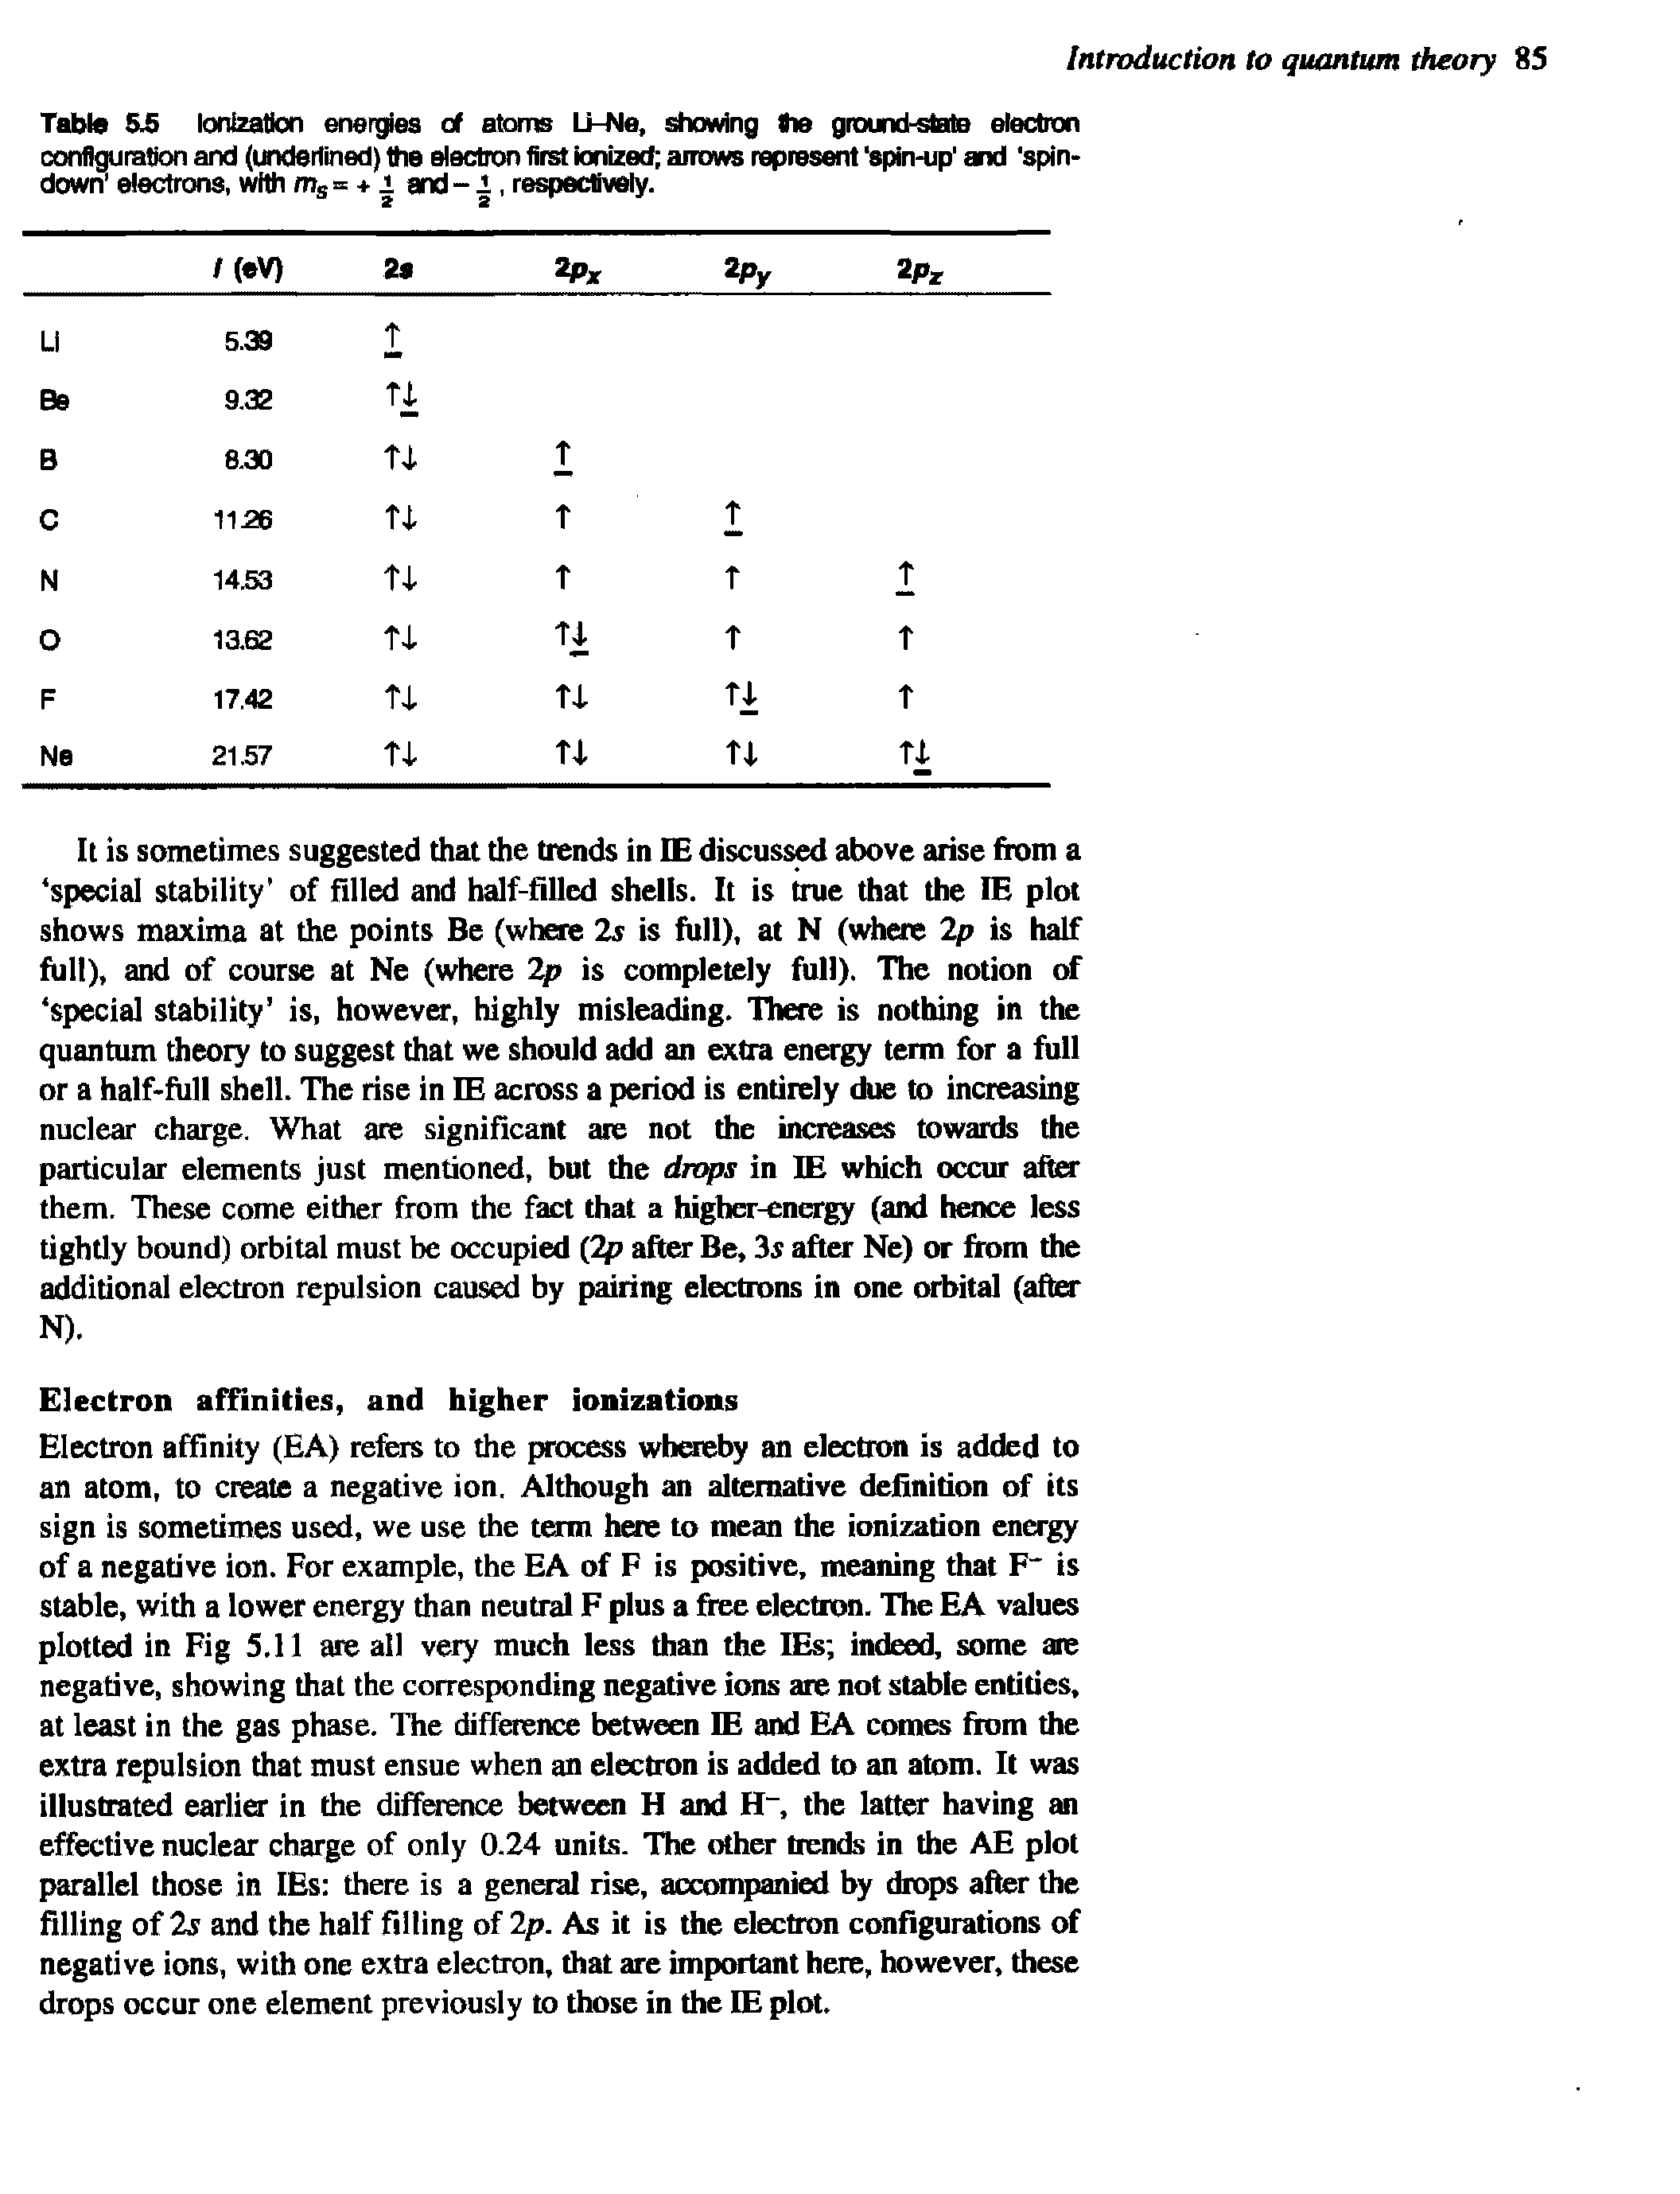 Table 55 Ionization energies of atoms Li-Ne, shewing the ground-state election configuration and (underlined) the electron first ionized arrows represent spin-up1 and spin-down electrons, with ms= +1 and-1, respectively.